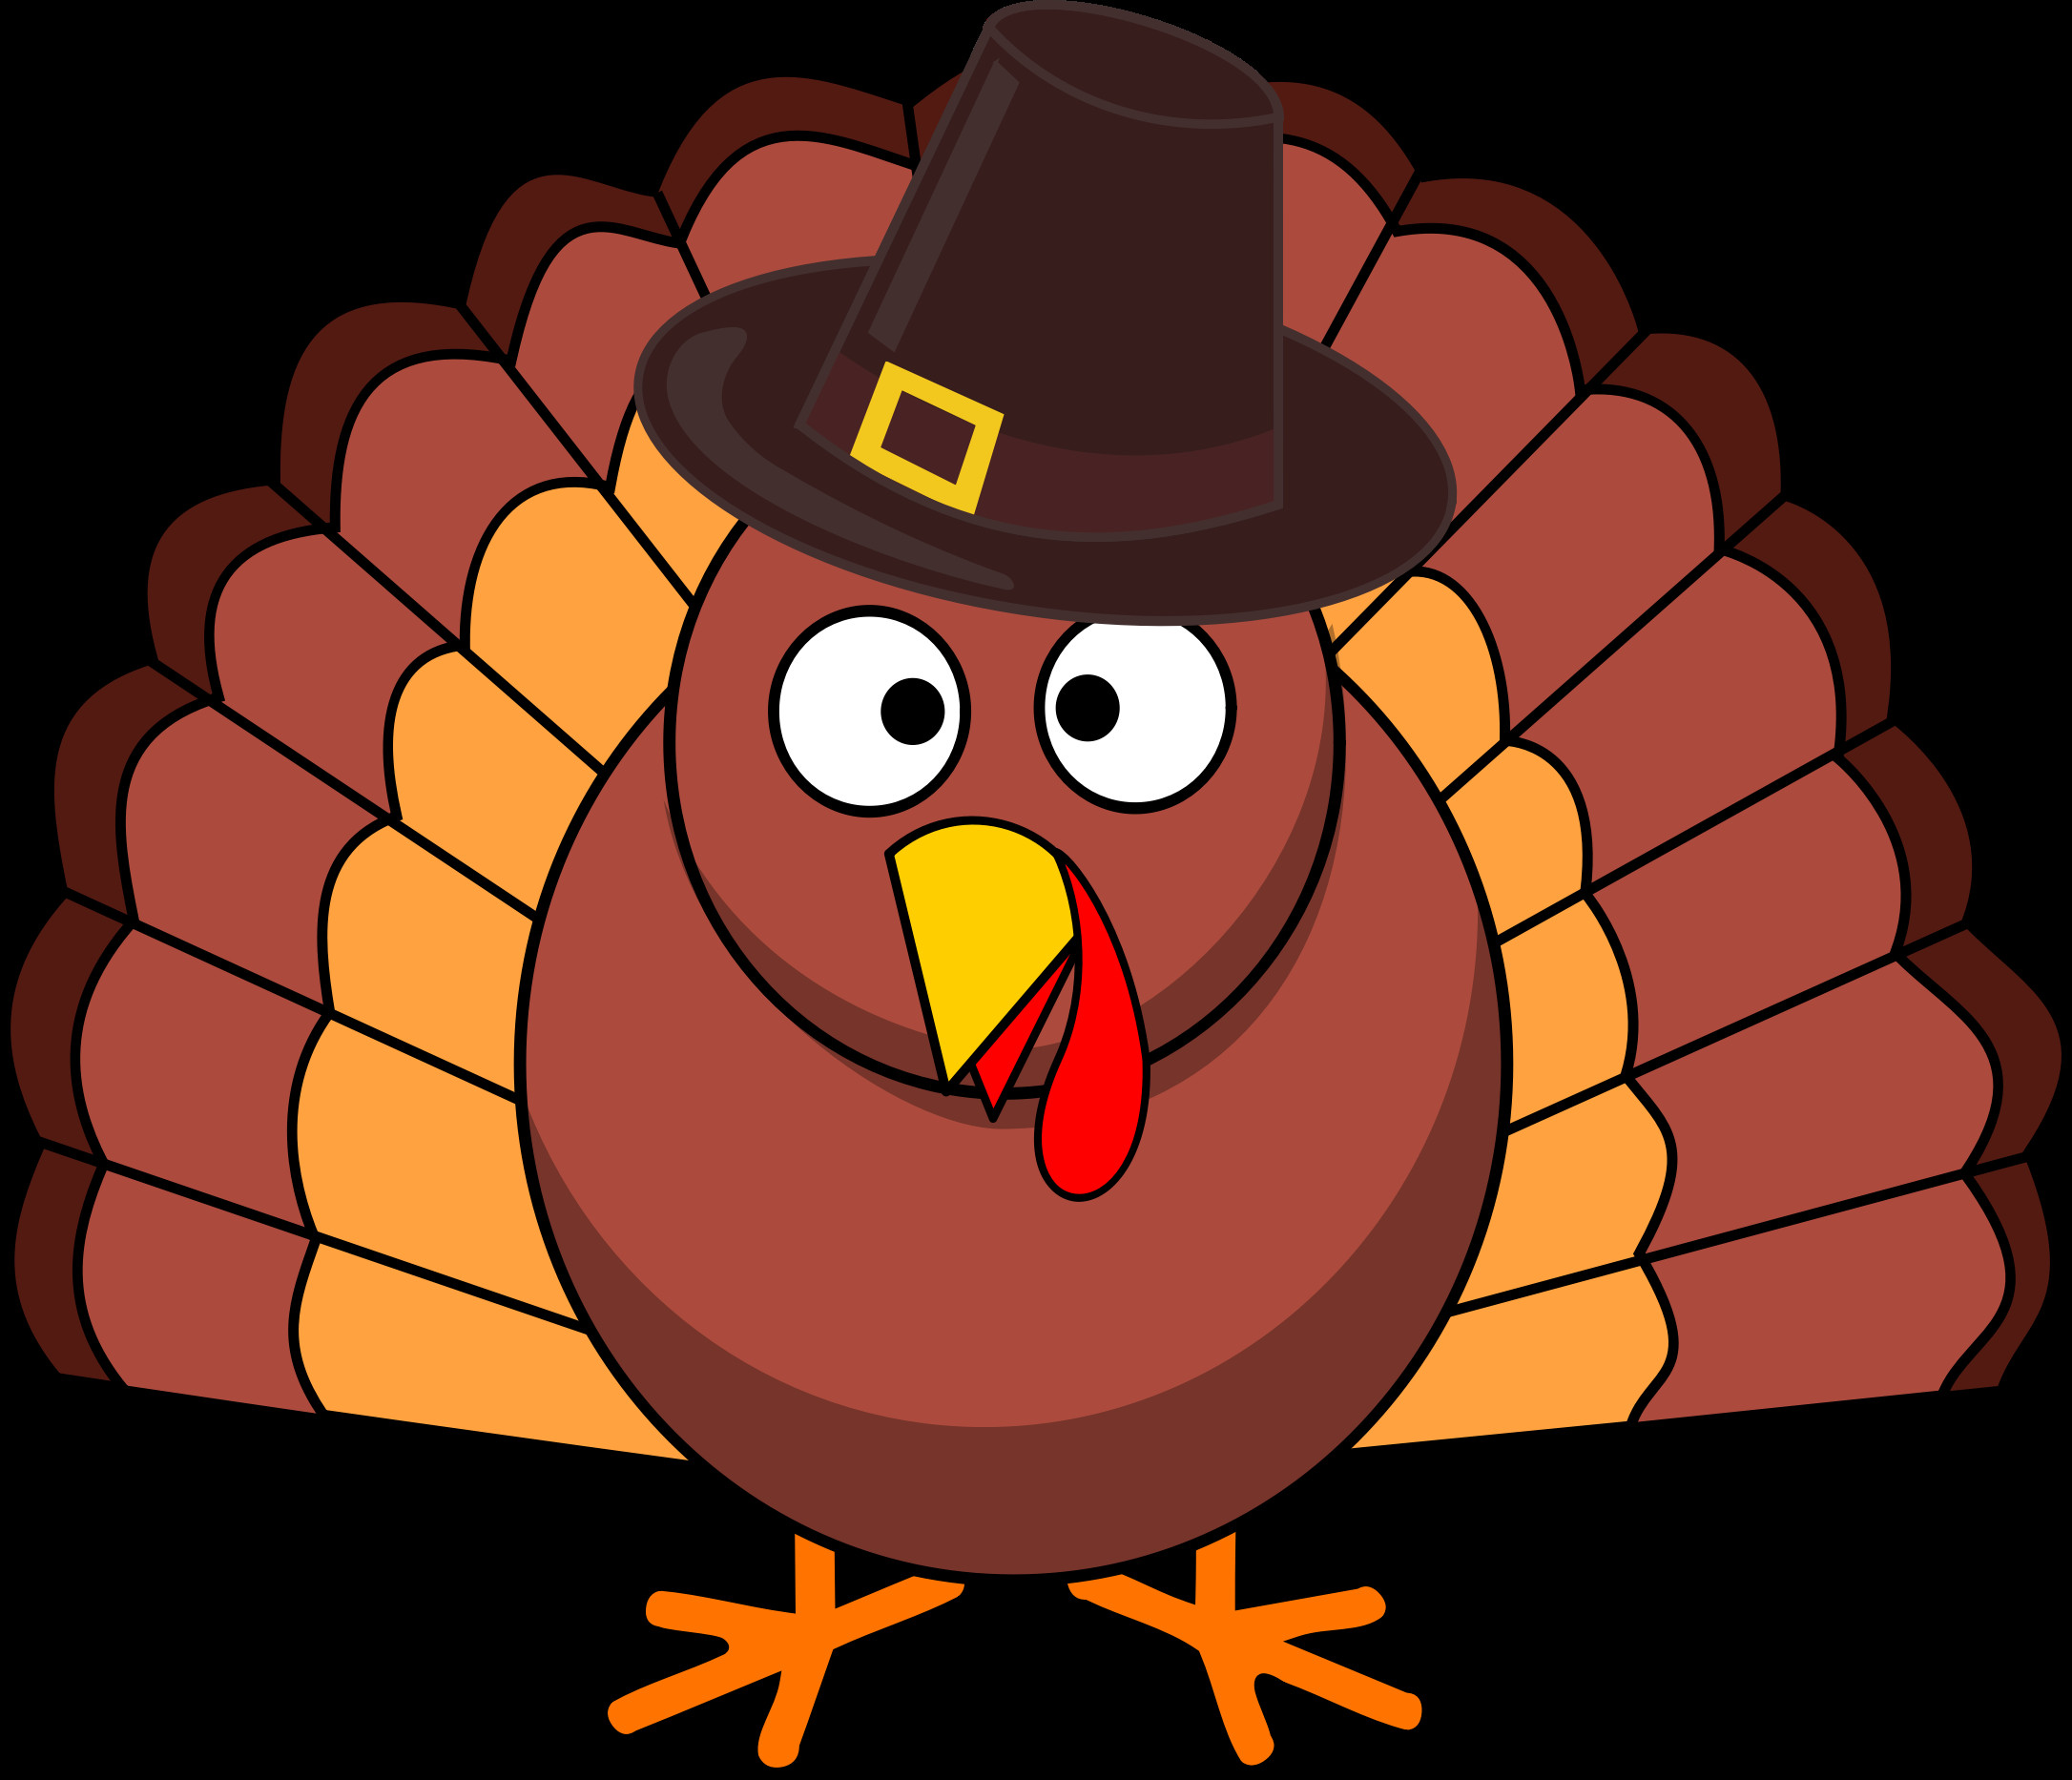 Animated Thanksgiving Turkey
 Try timing your Thanksgiving turkey the Spotify way It’s